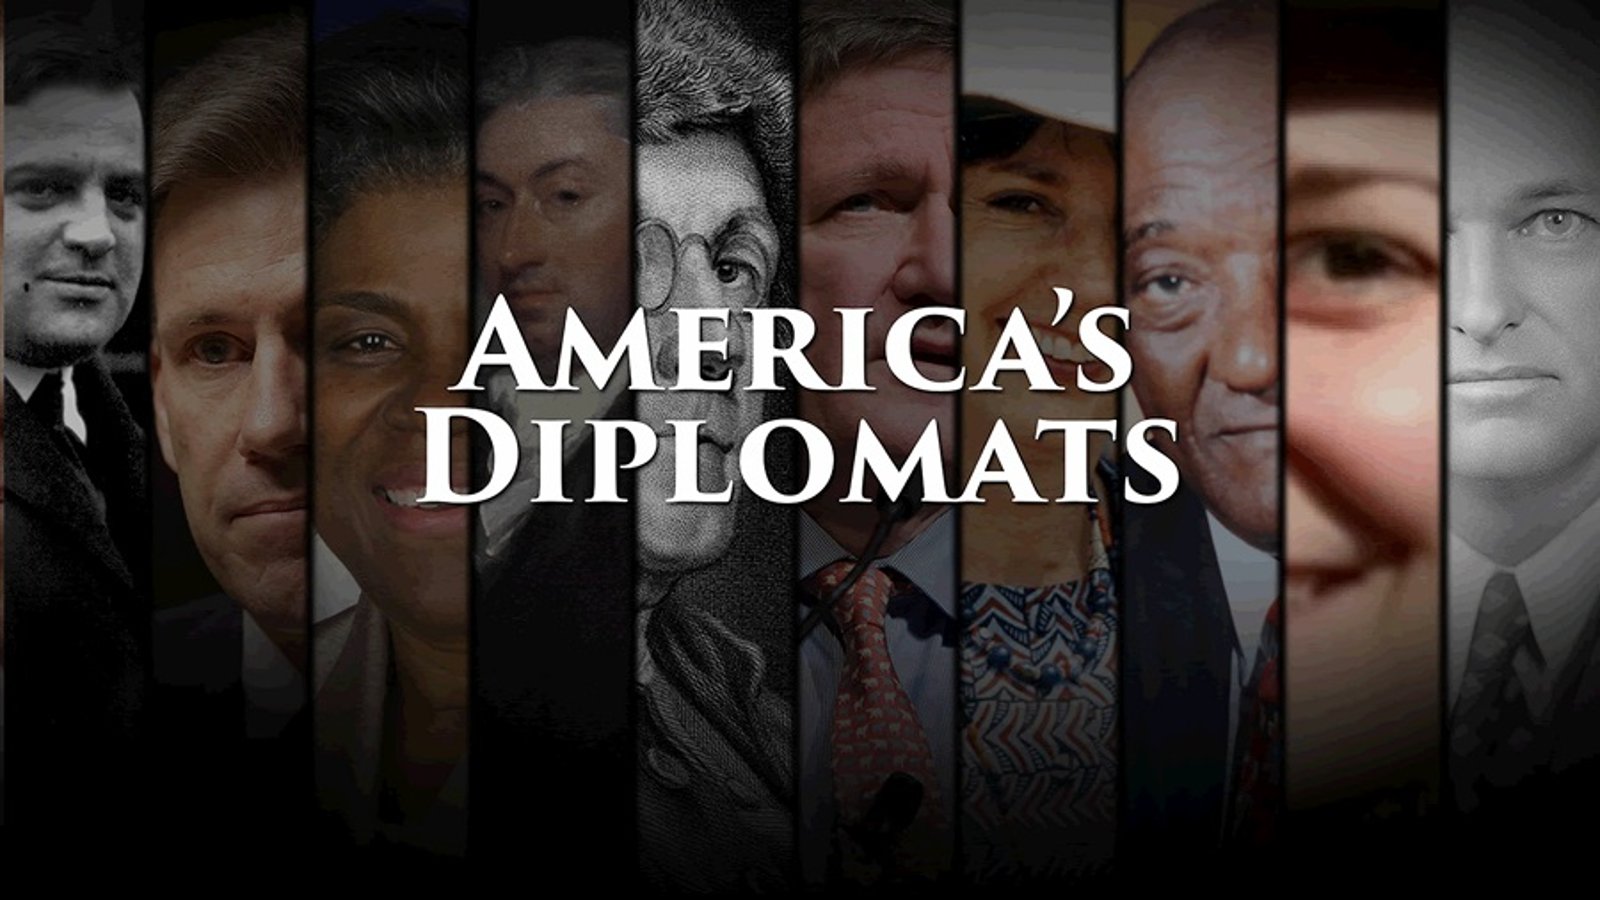 America's Diplomats - Behind the Scenes of America's Foreign Policy